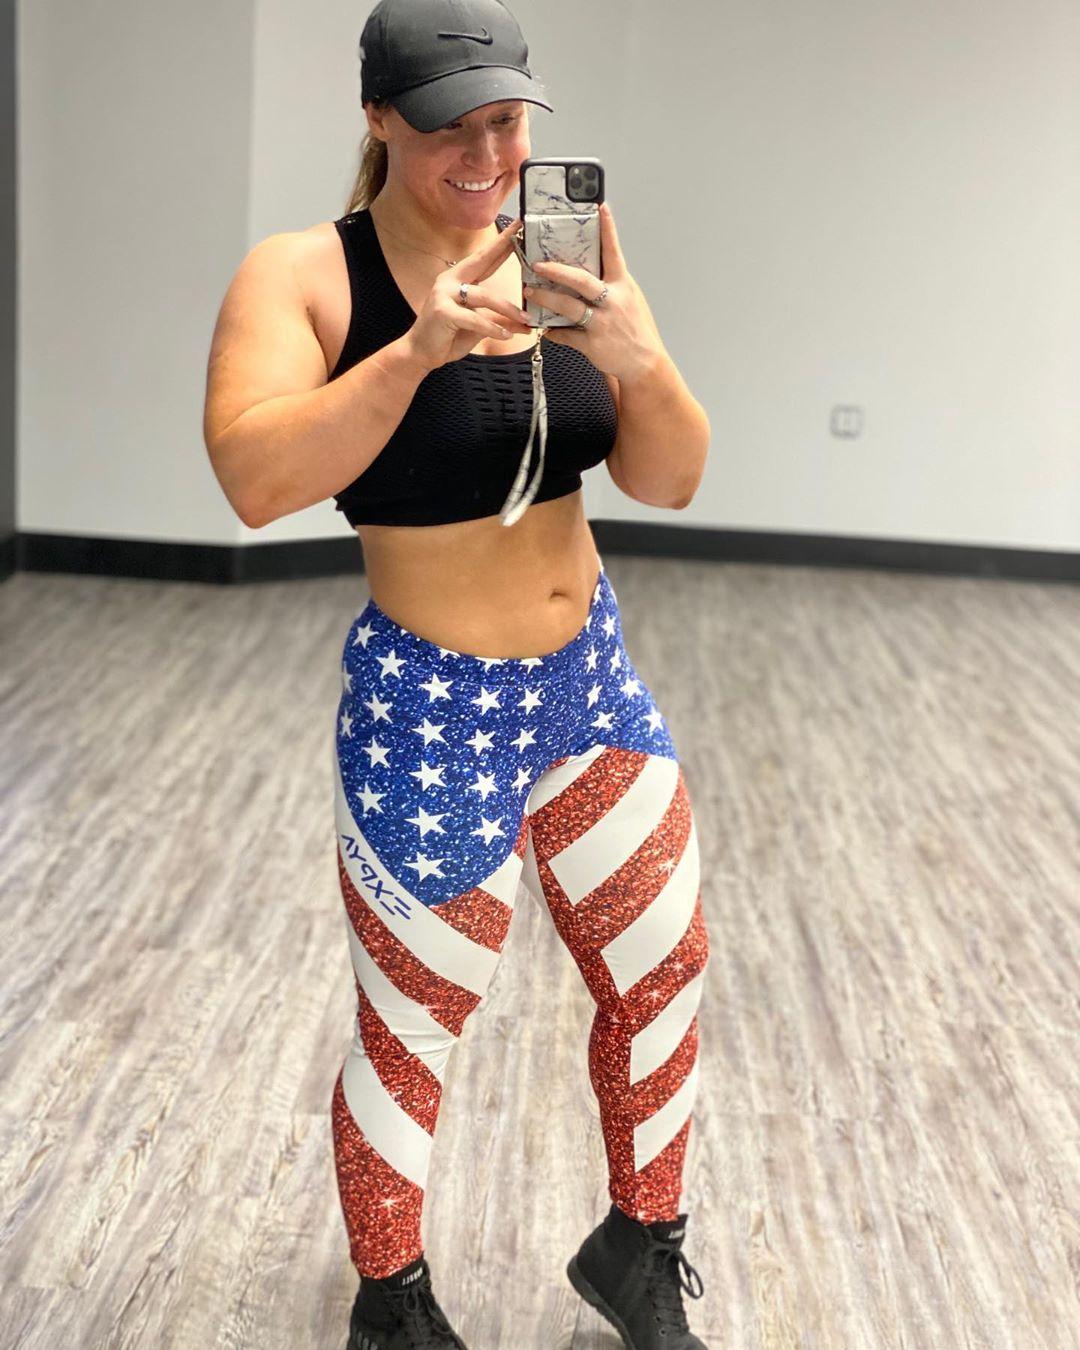 51 Hot Pictures Of Jordynne Grace Which Will Cause You To Surrender To Her Inexplicable Beauty | Best Of Comic Books